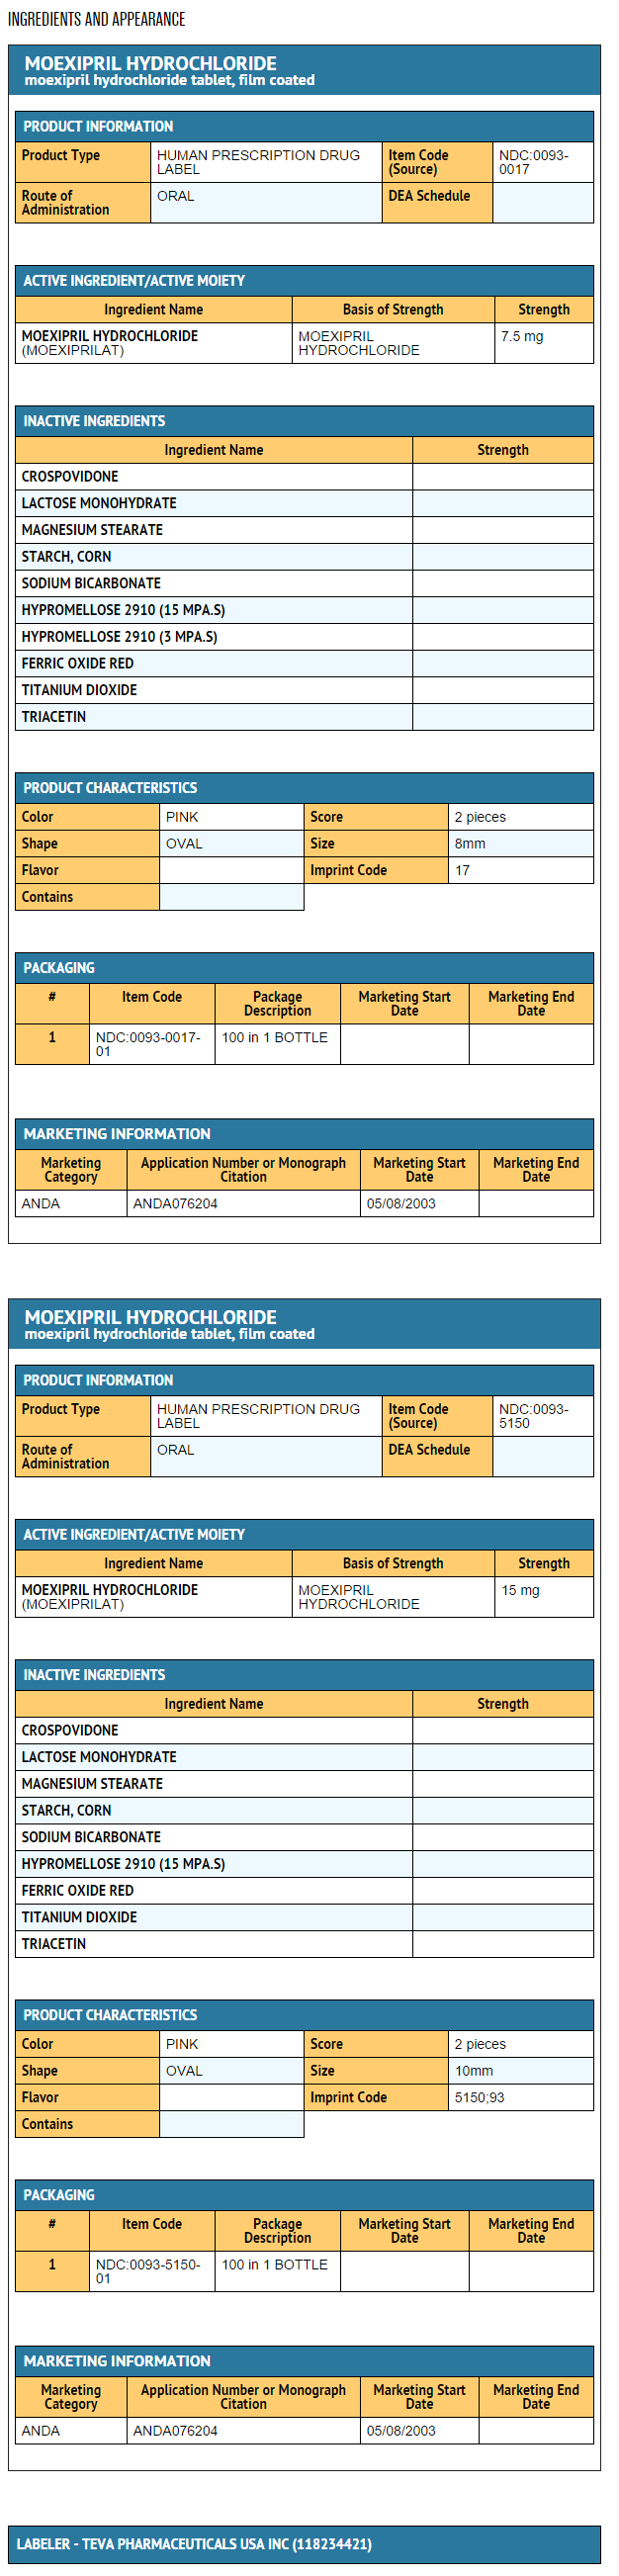 File:Moexipril hydrochloride ingredients and appearance.png